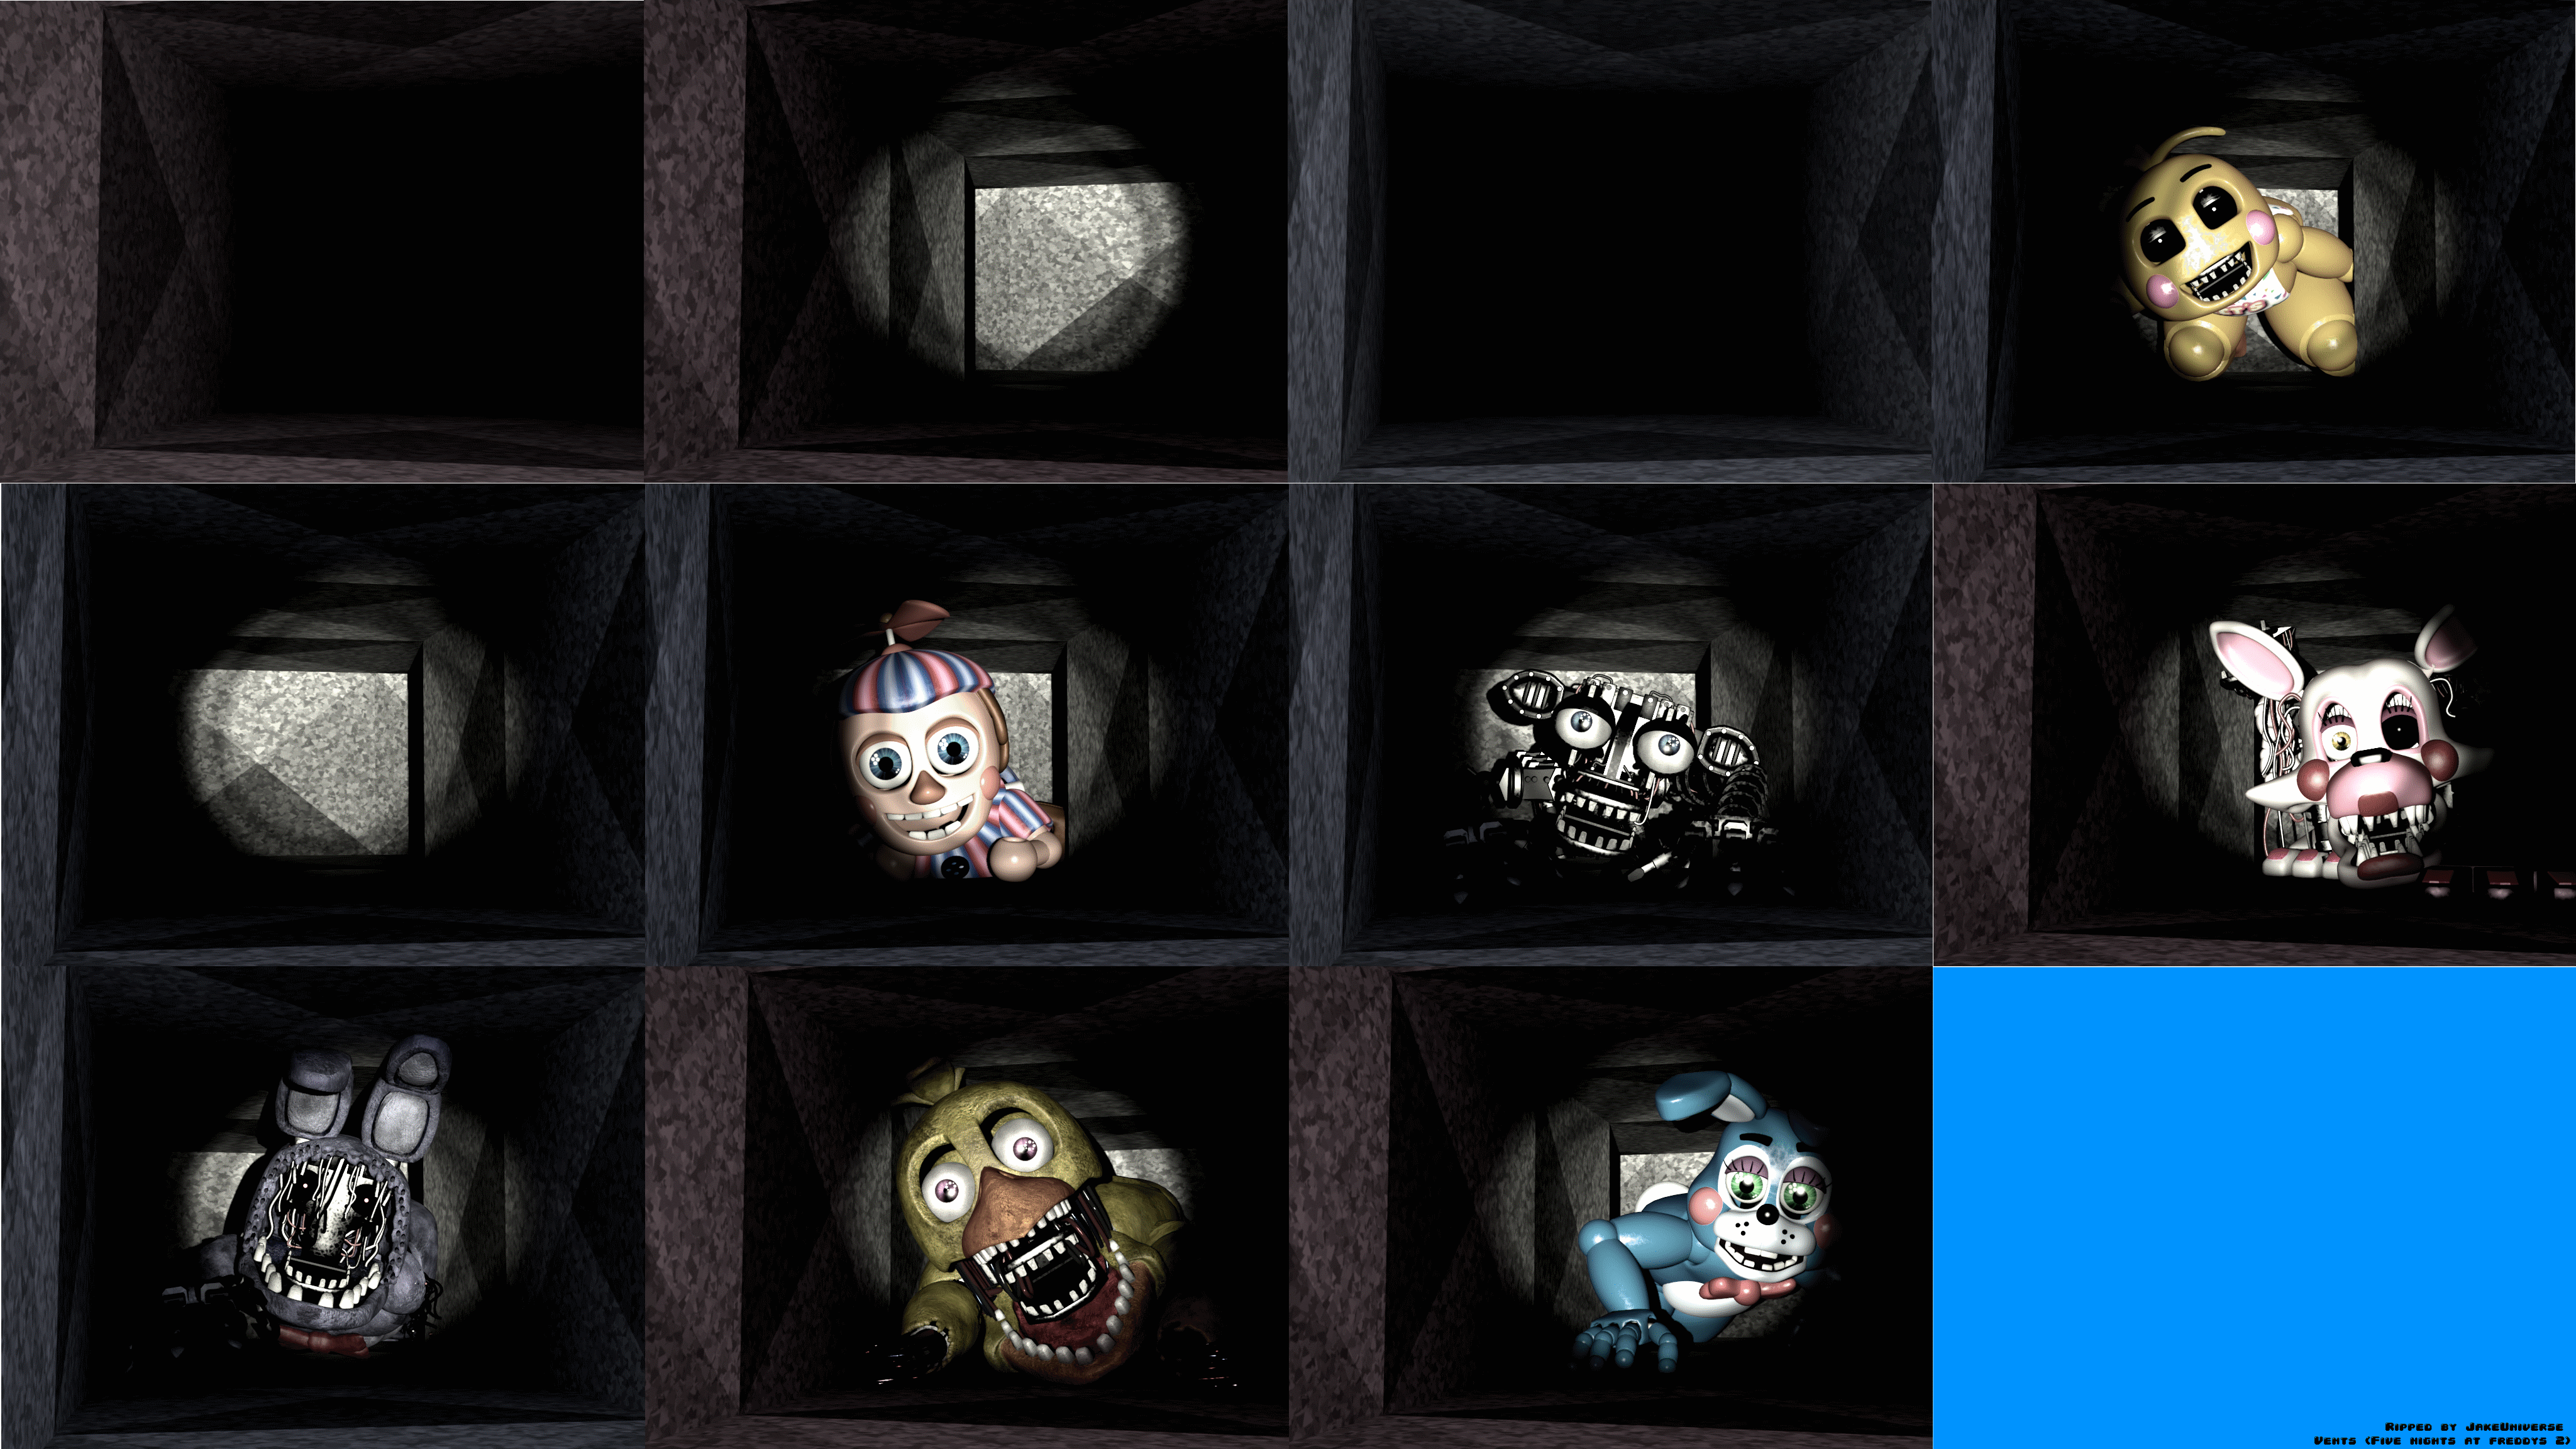 Five Nights at Freddy's 2 - Vents